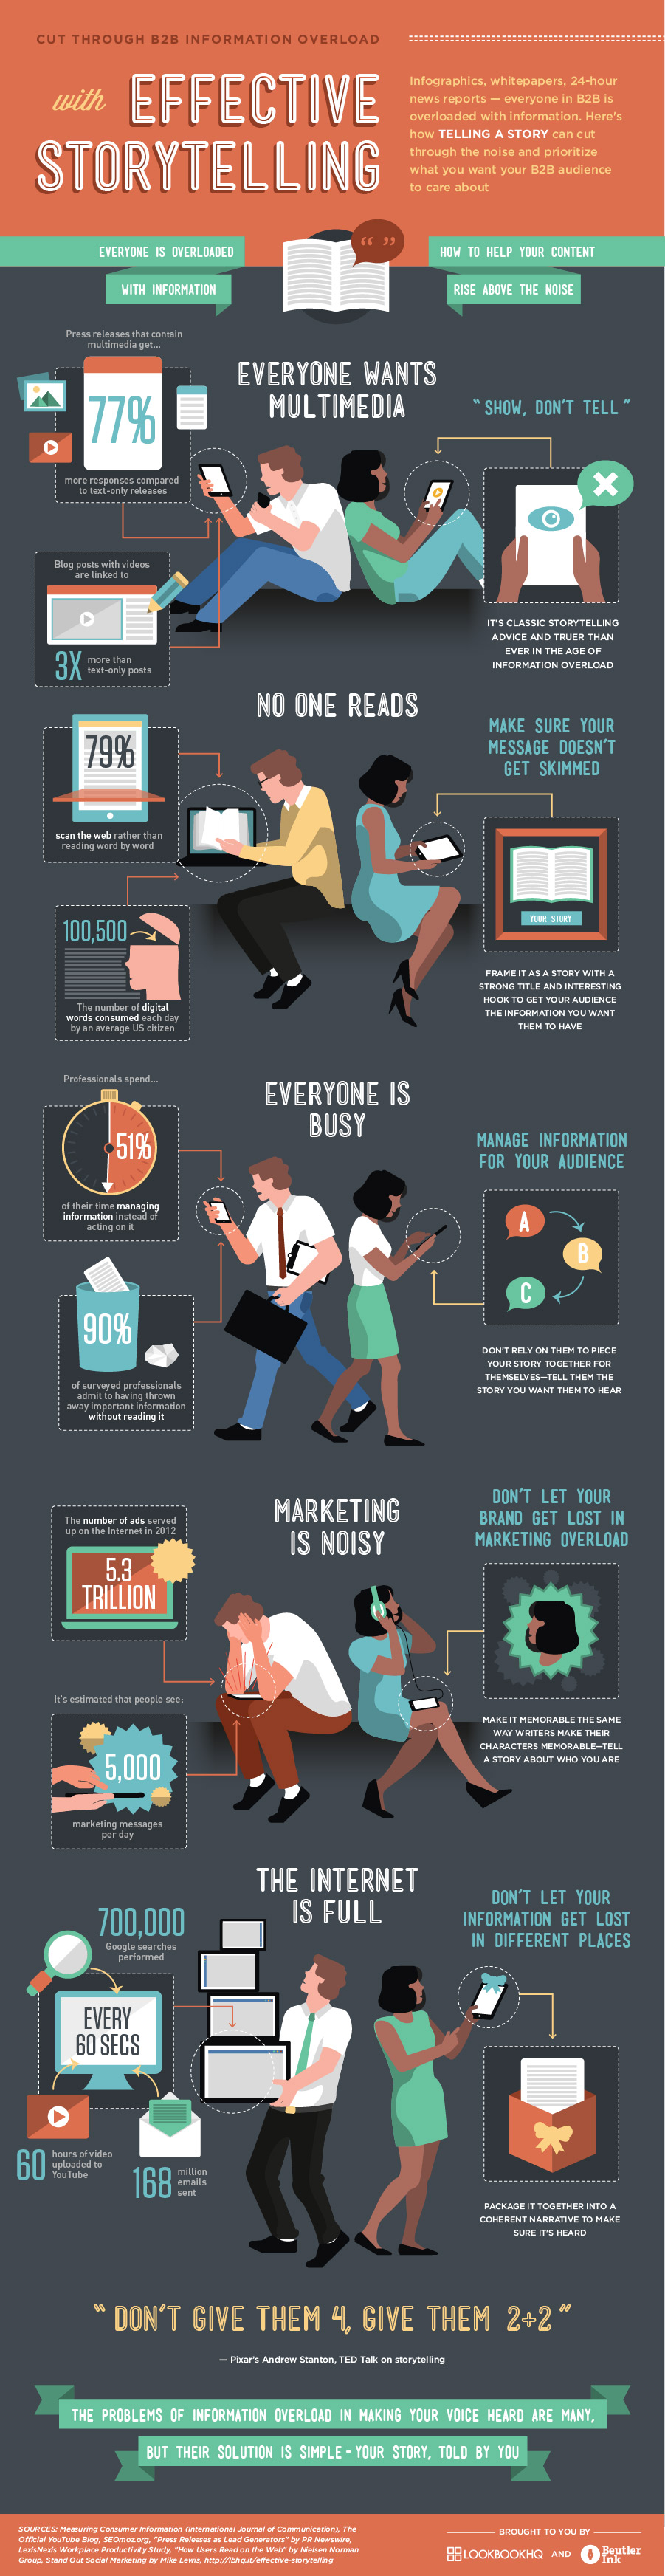 Storytelling in Business Infographic | Mitchell Ditkoff